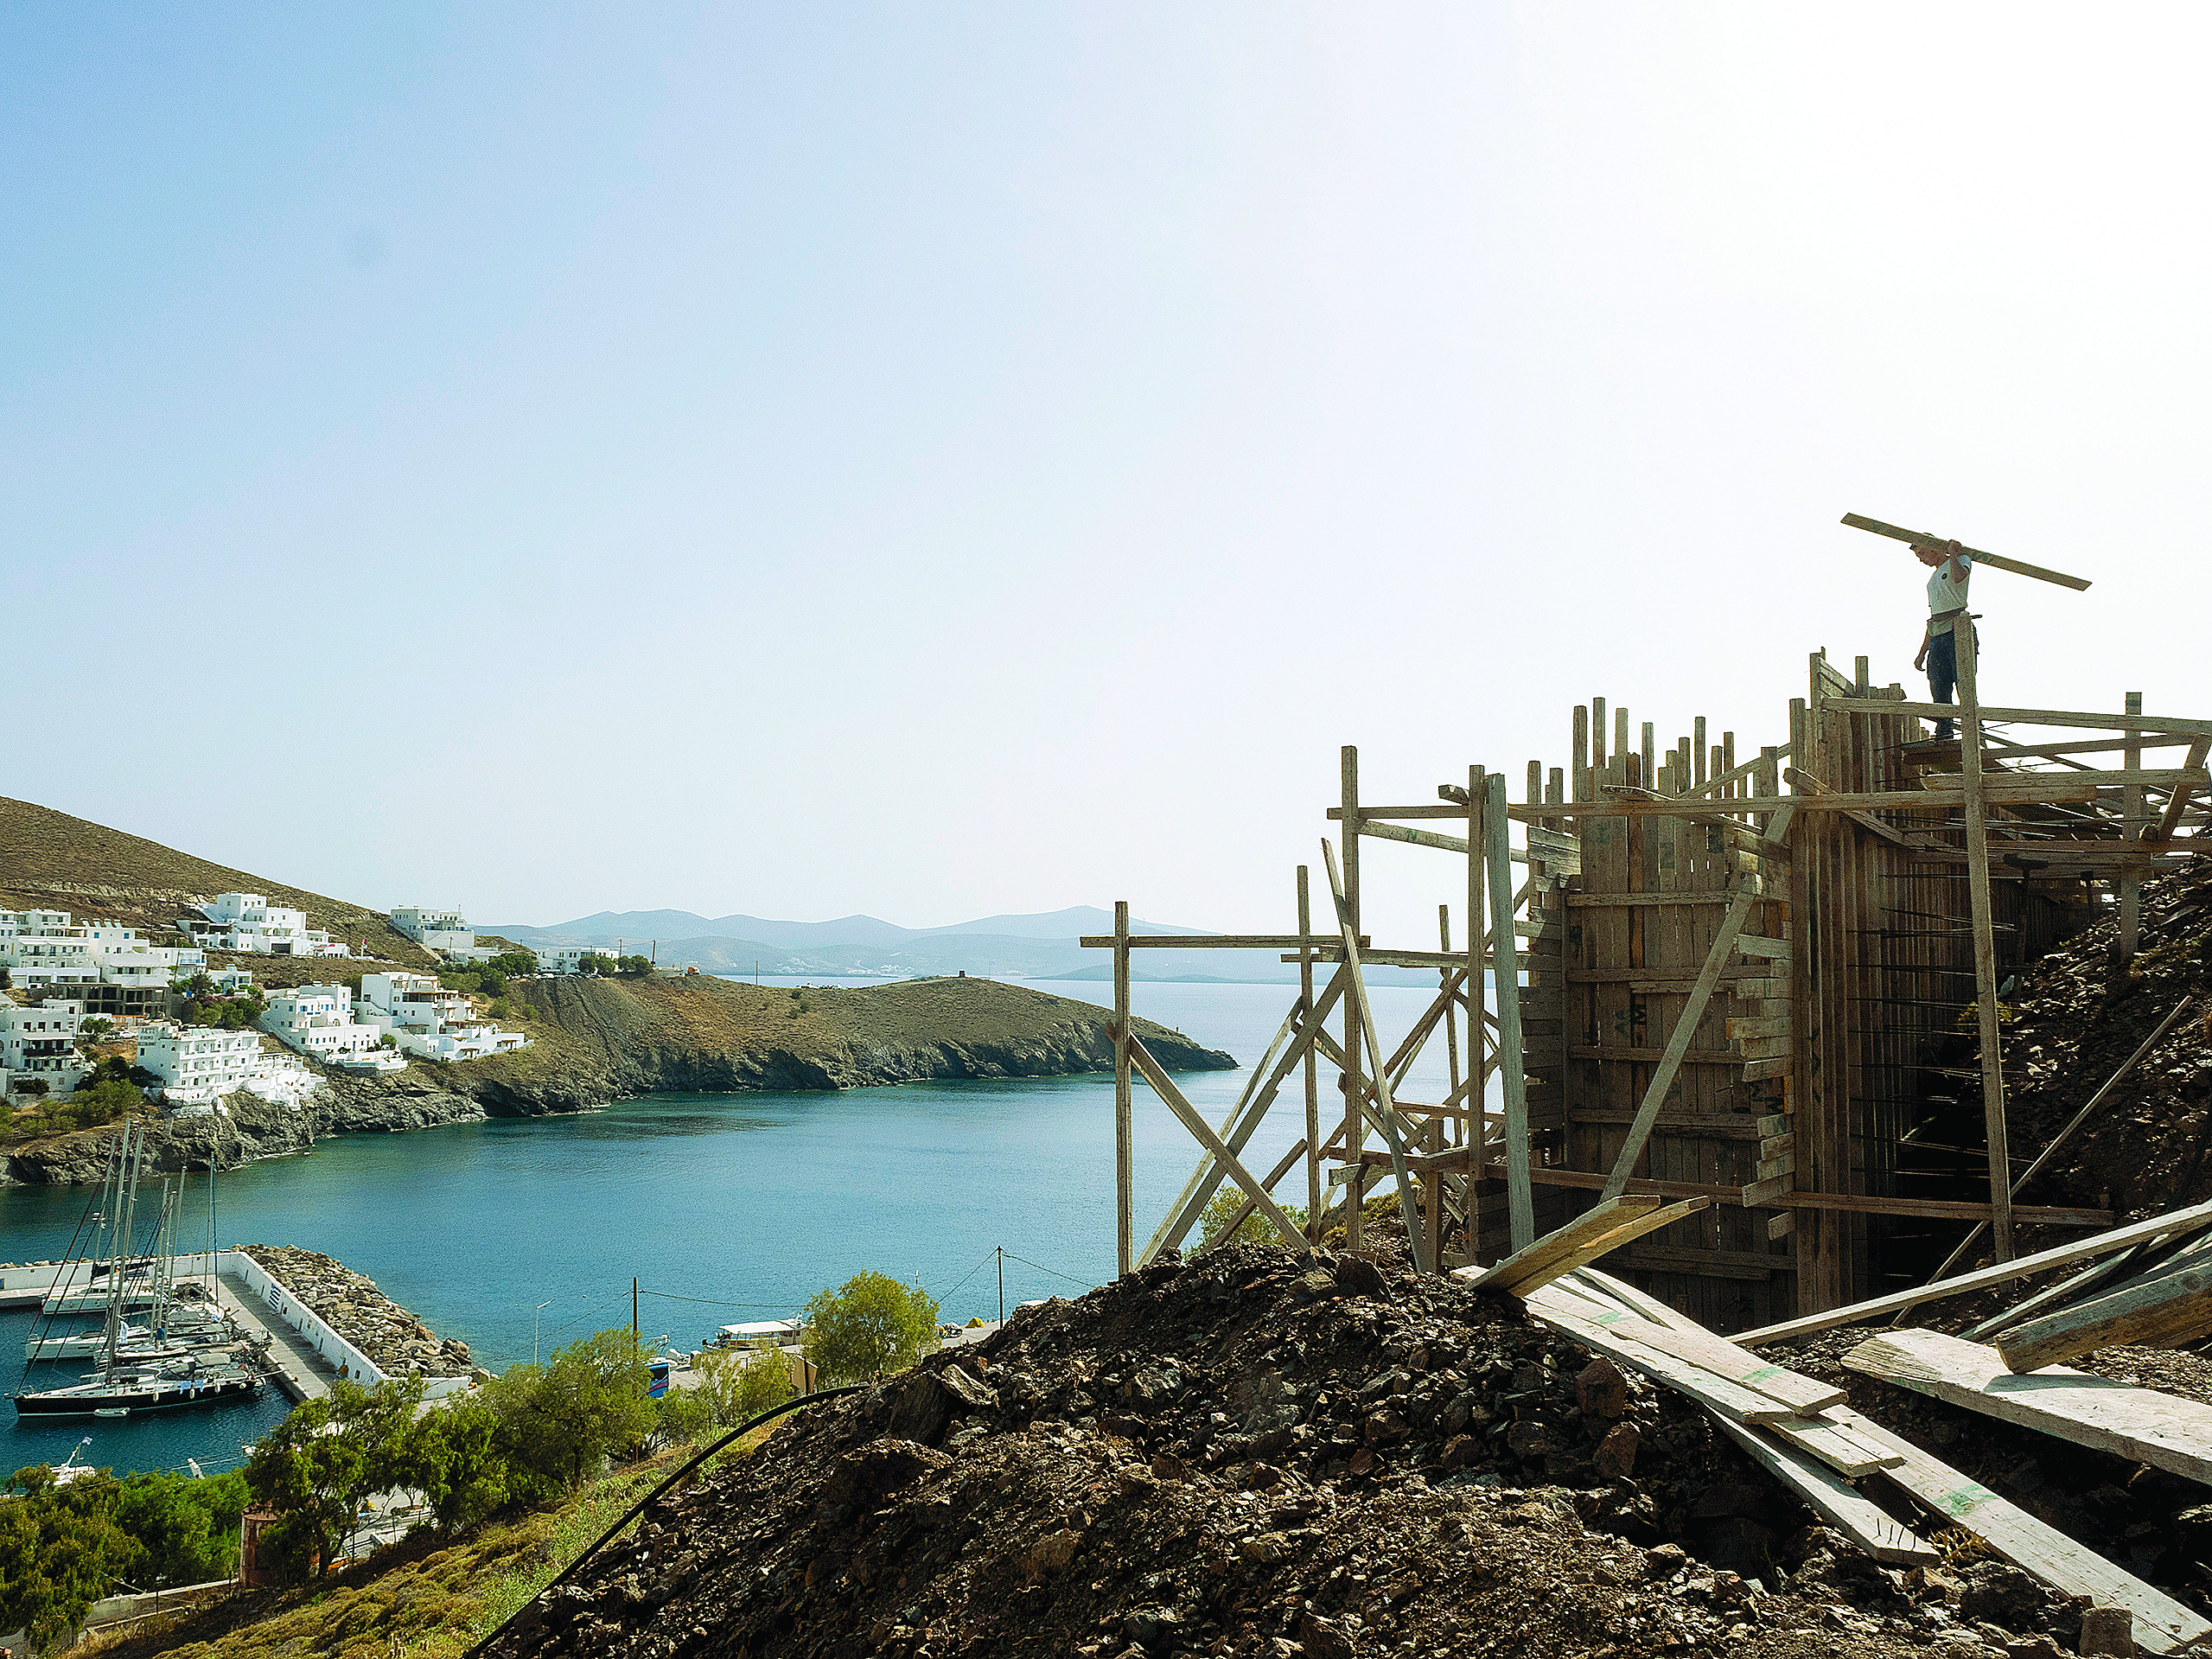 Astypalaia: Tourism here is a family affair